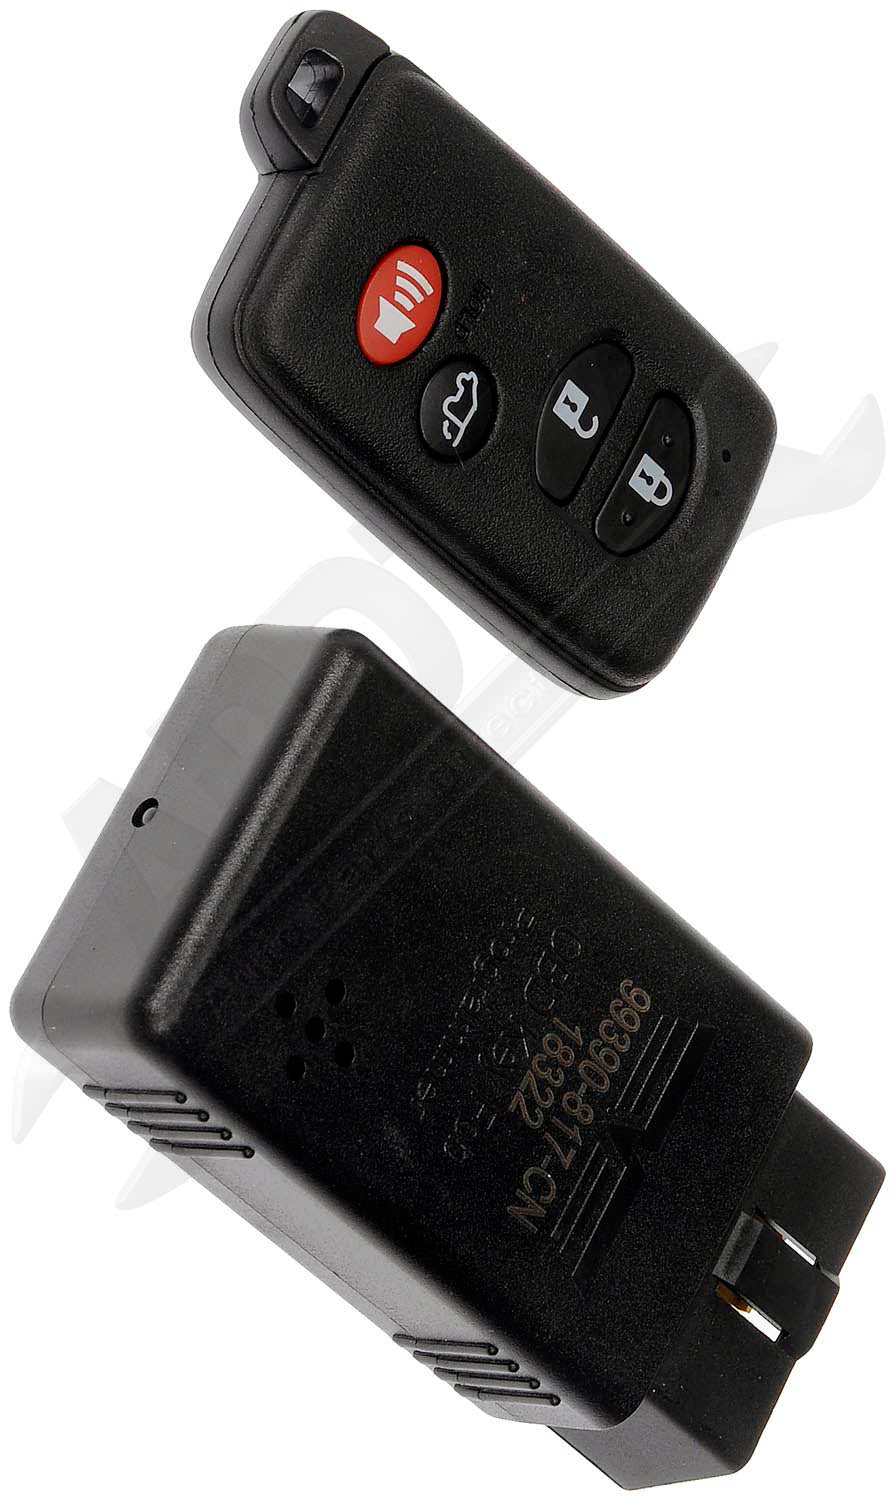 APDTY, APDTY 145063 Keyless Entry Remote 4 Button Replaces 8990406041, 8990448110